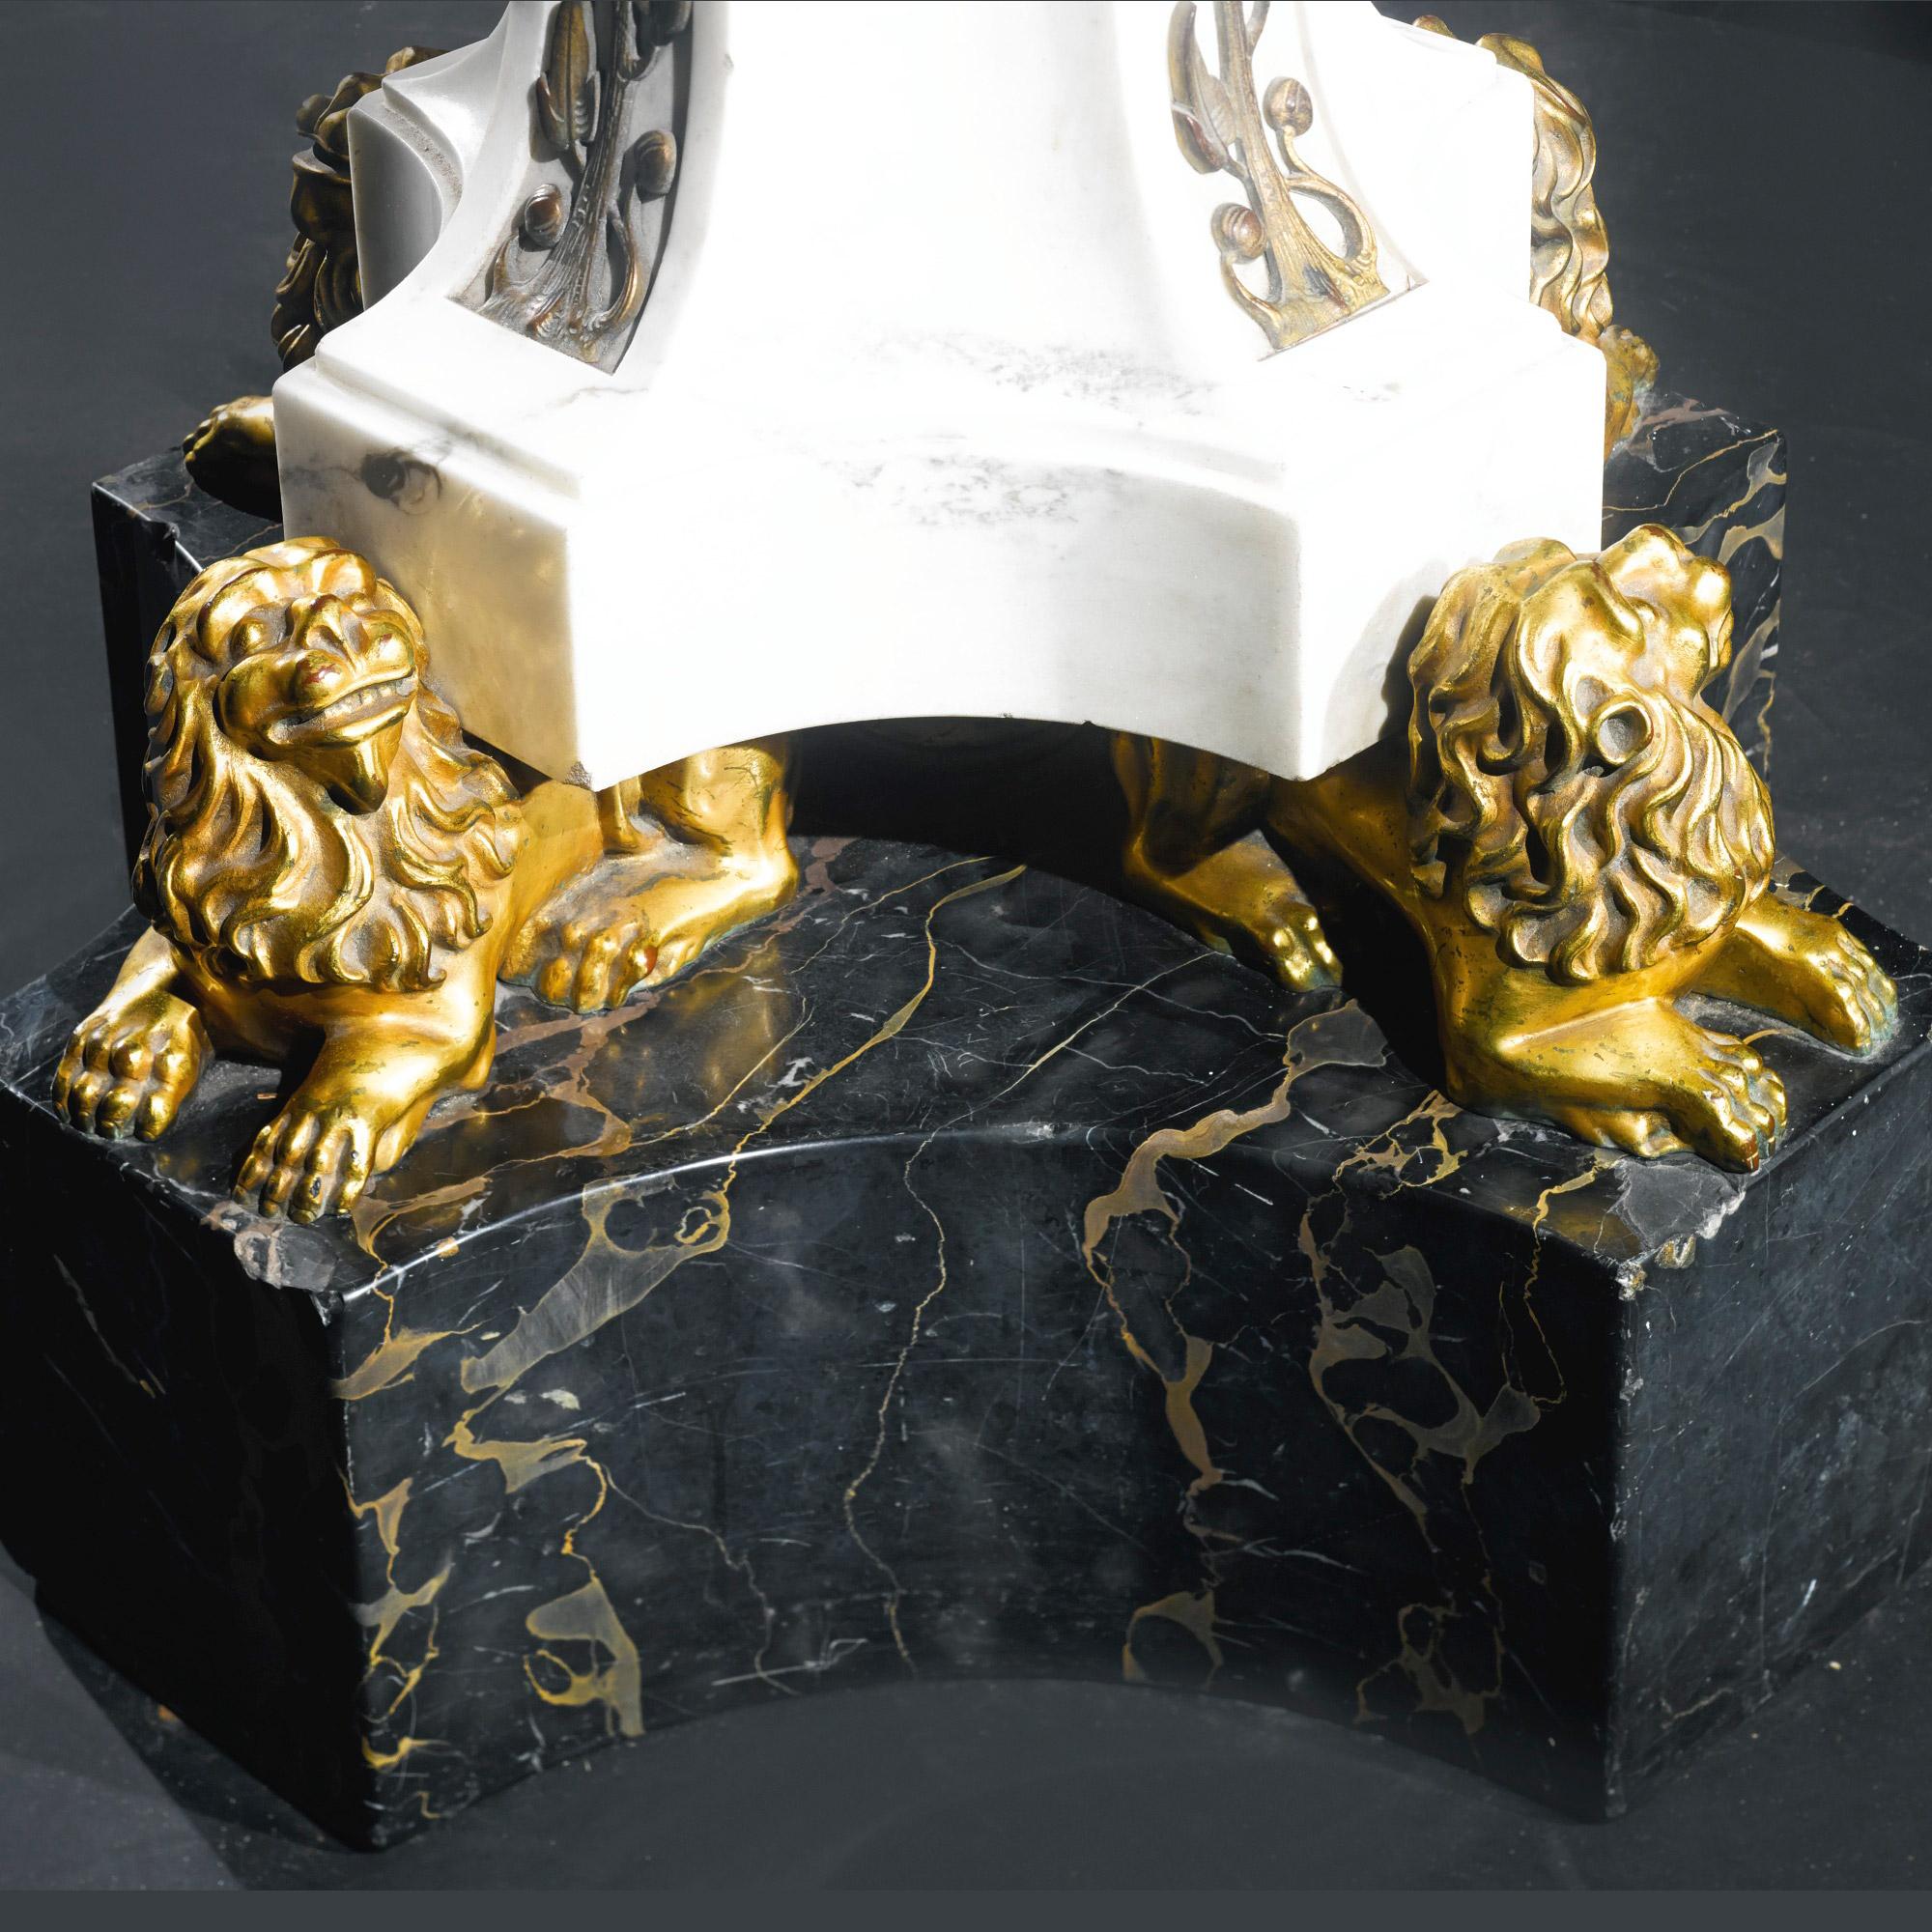  Monumental Pair of Ormolu Mounted Marble Floor Lamps att. E.F.Caldwell In Excellent Condition For Sale In New York, NY